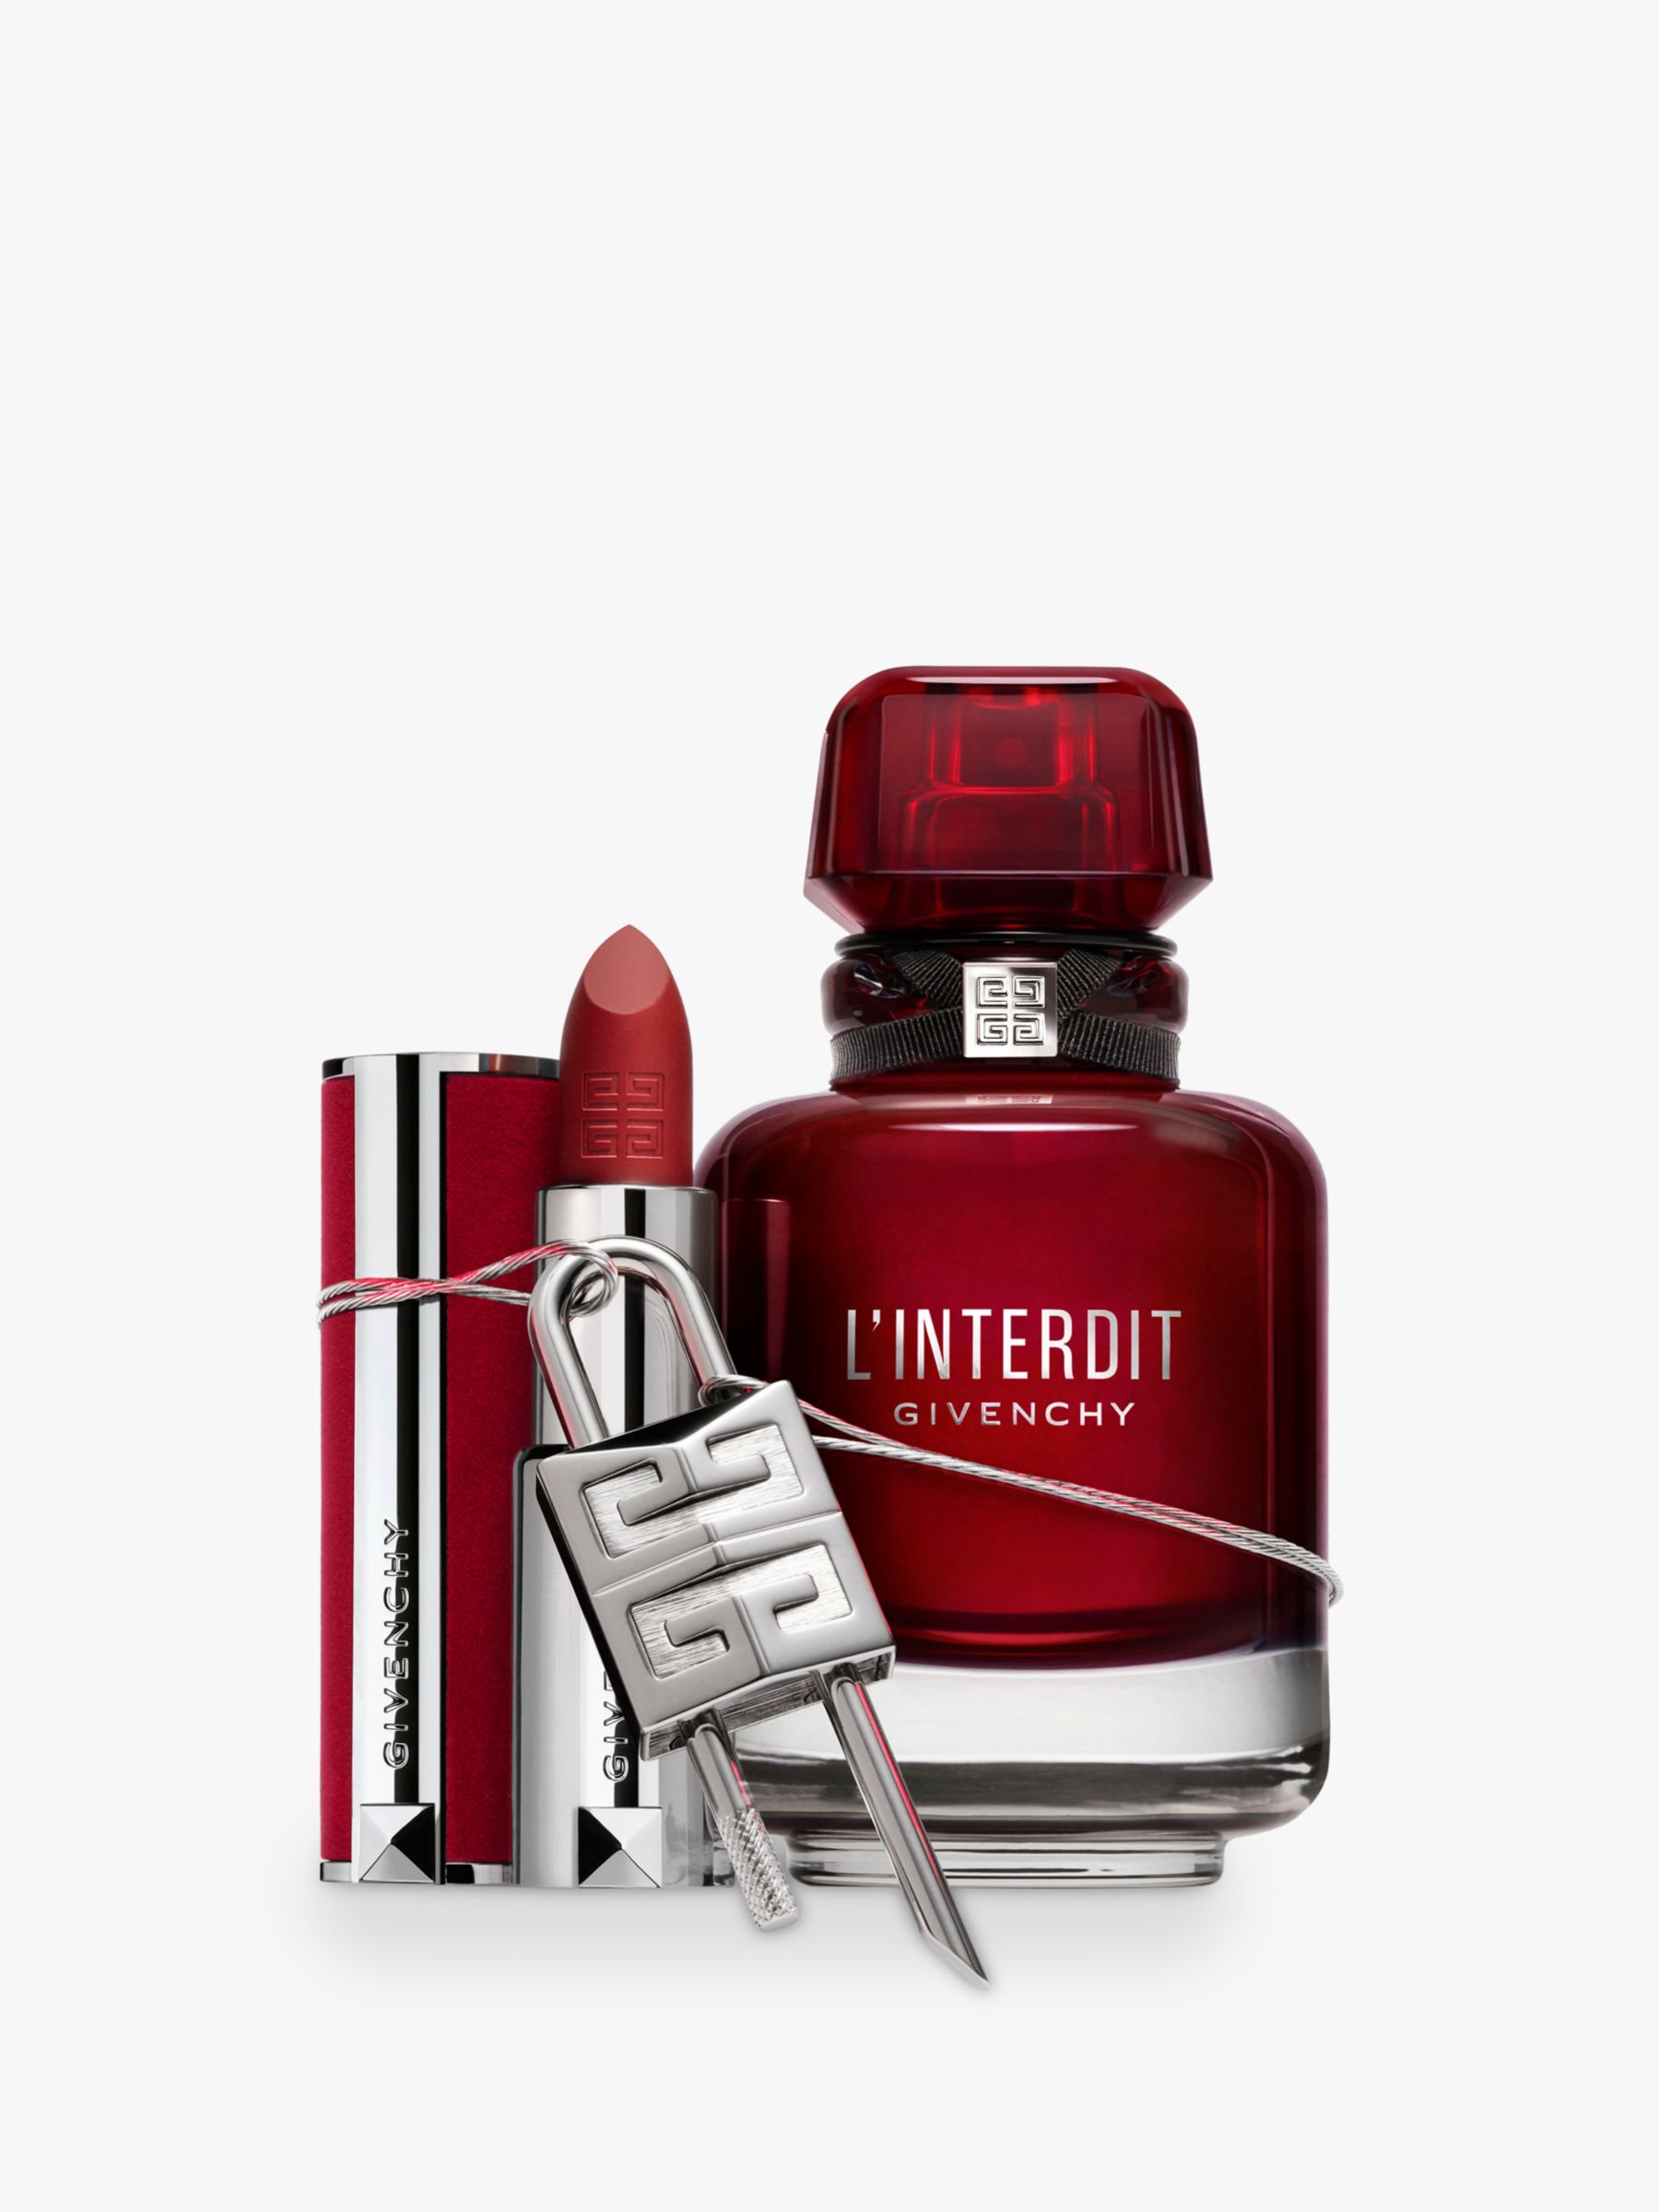 Givenchy L'interdit EDP Rouge Review: Fiery feminine energy in a bottle